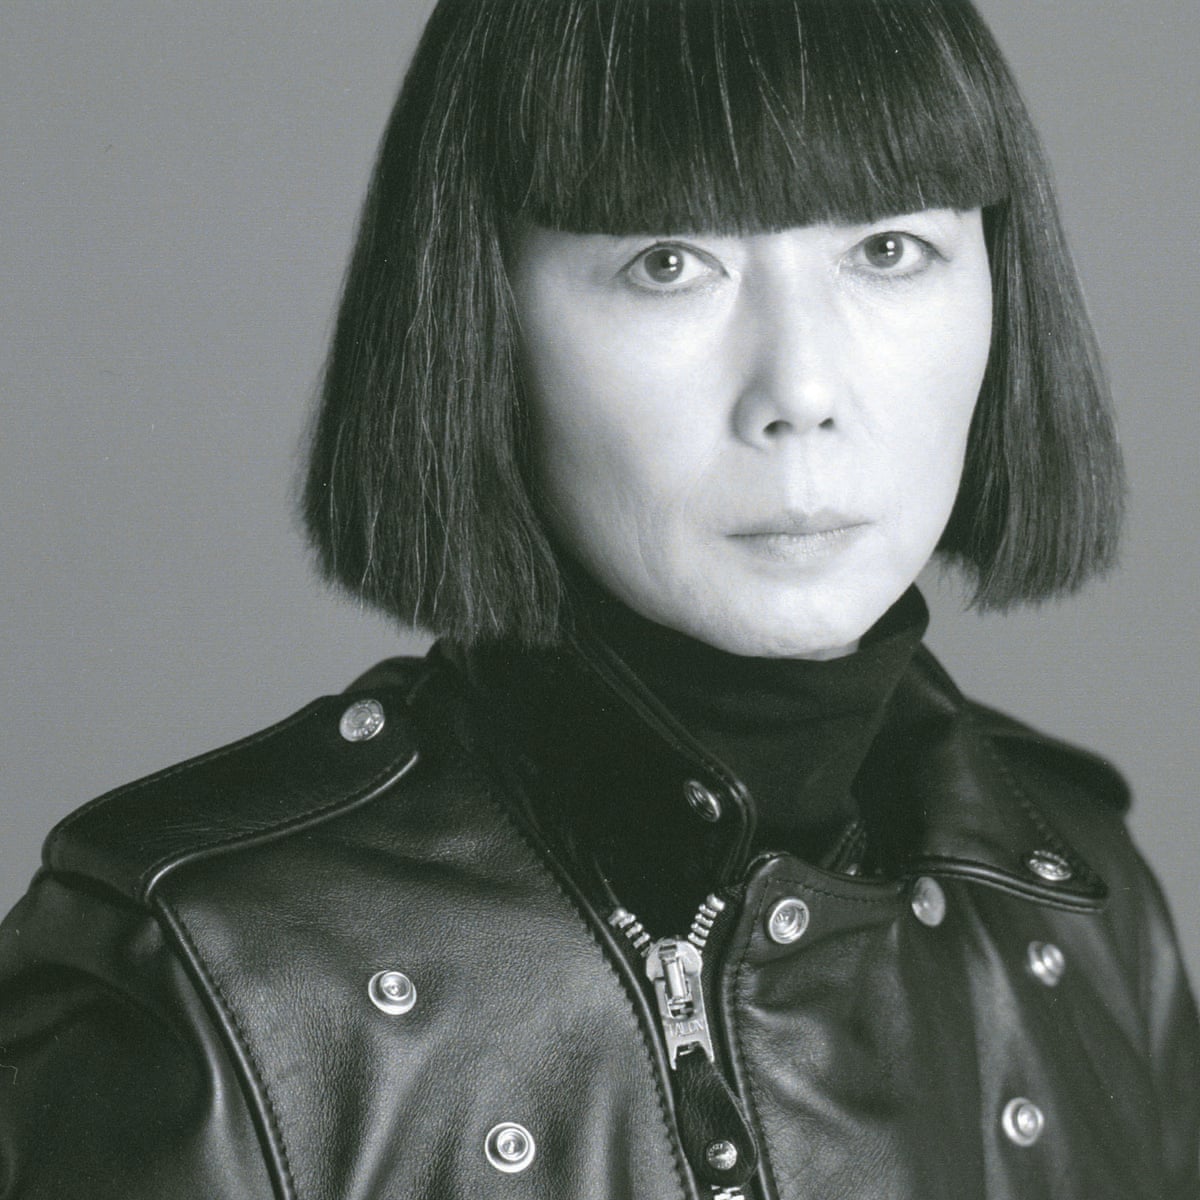 The culture Kawakubo \'Contemporary not | interview: does allow Rei Guardian Rei nuance\' for Kawakubo |